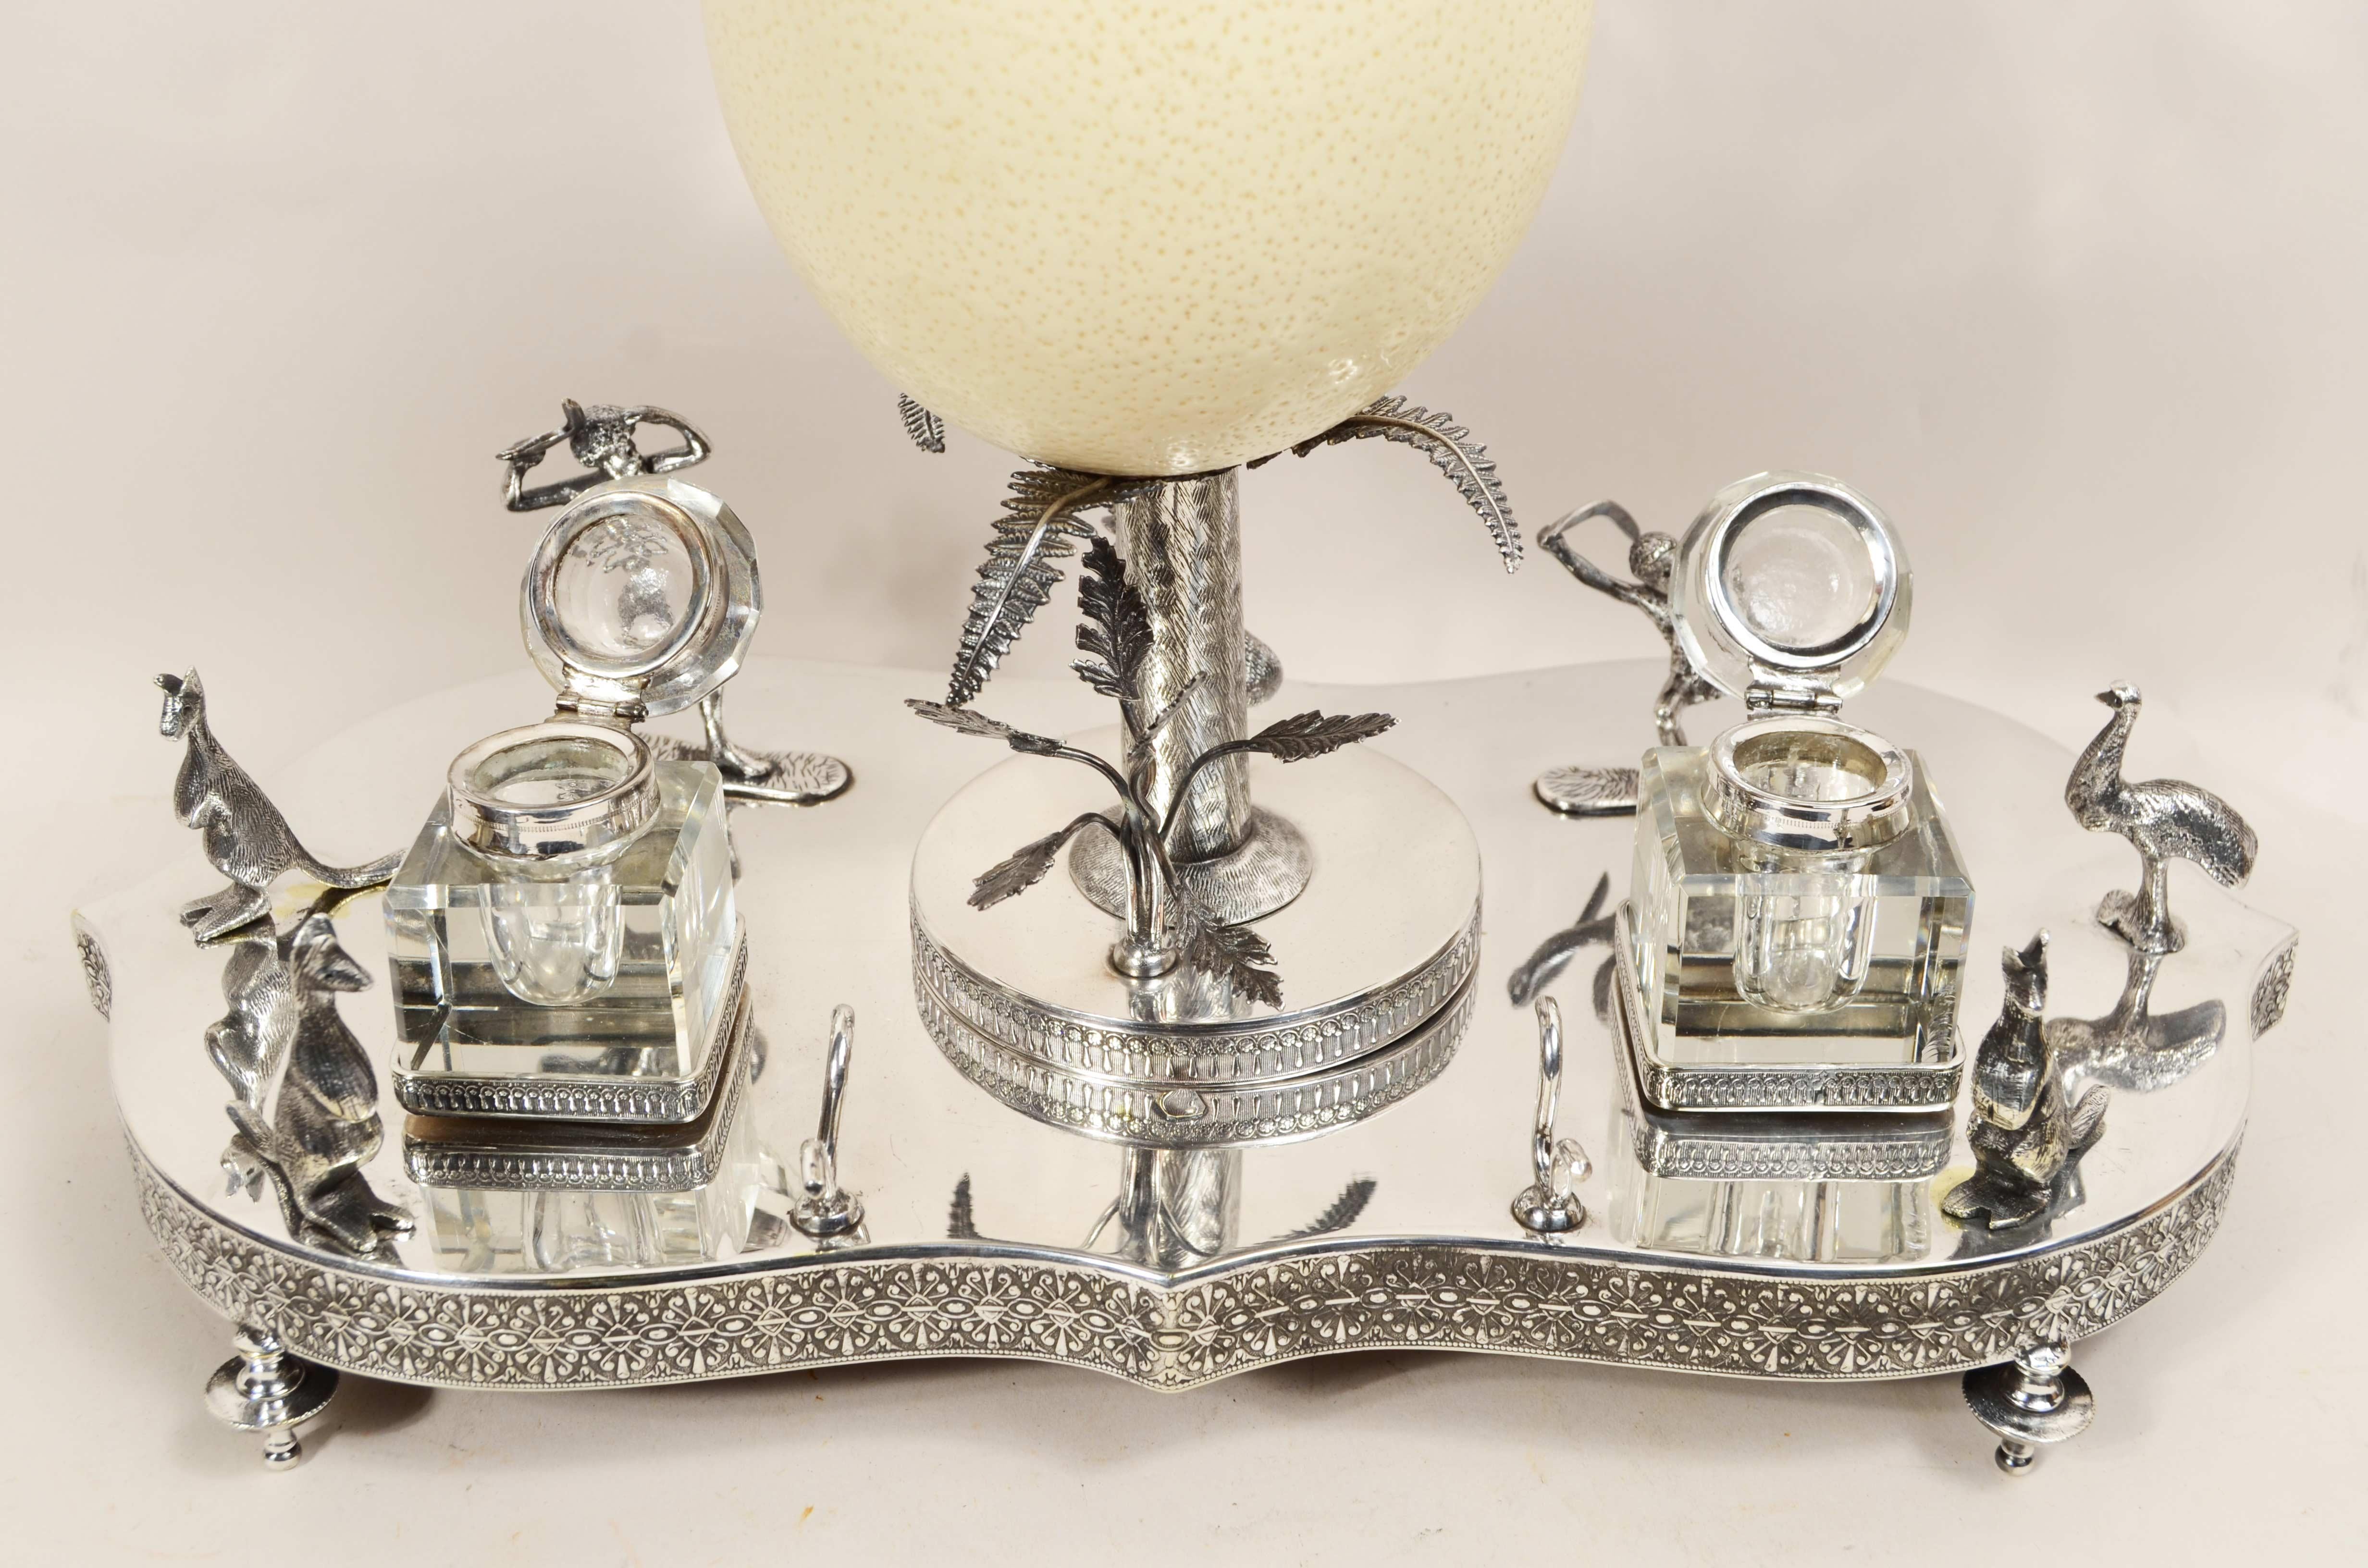 Victorian-era silver plate wunderkammer inkwell with emu egg For Sale 6